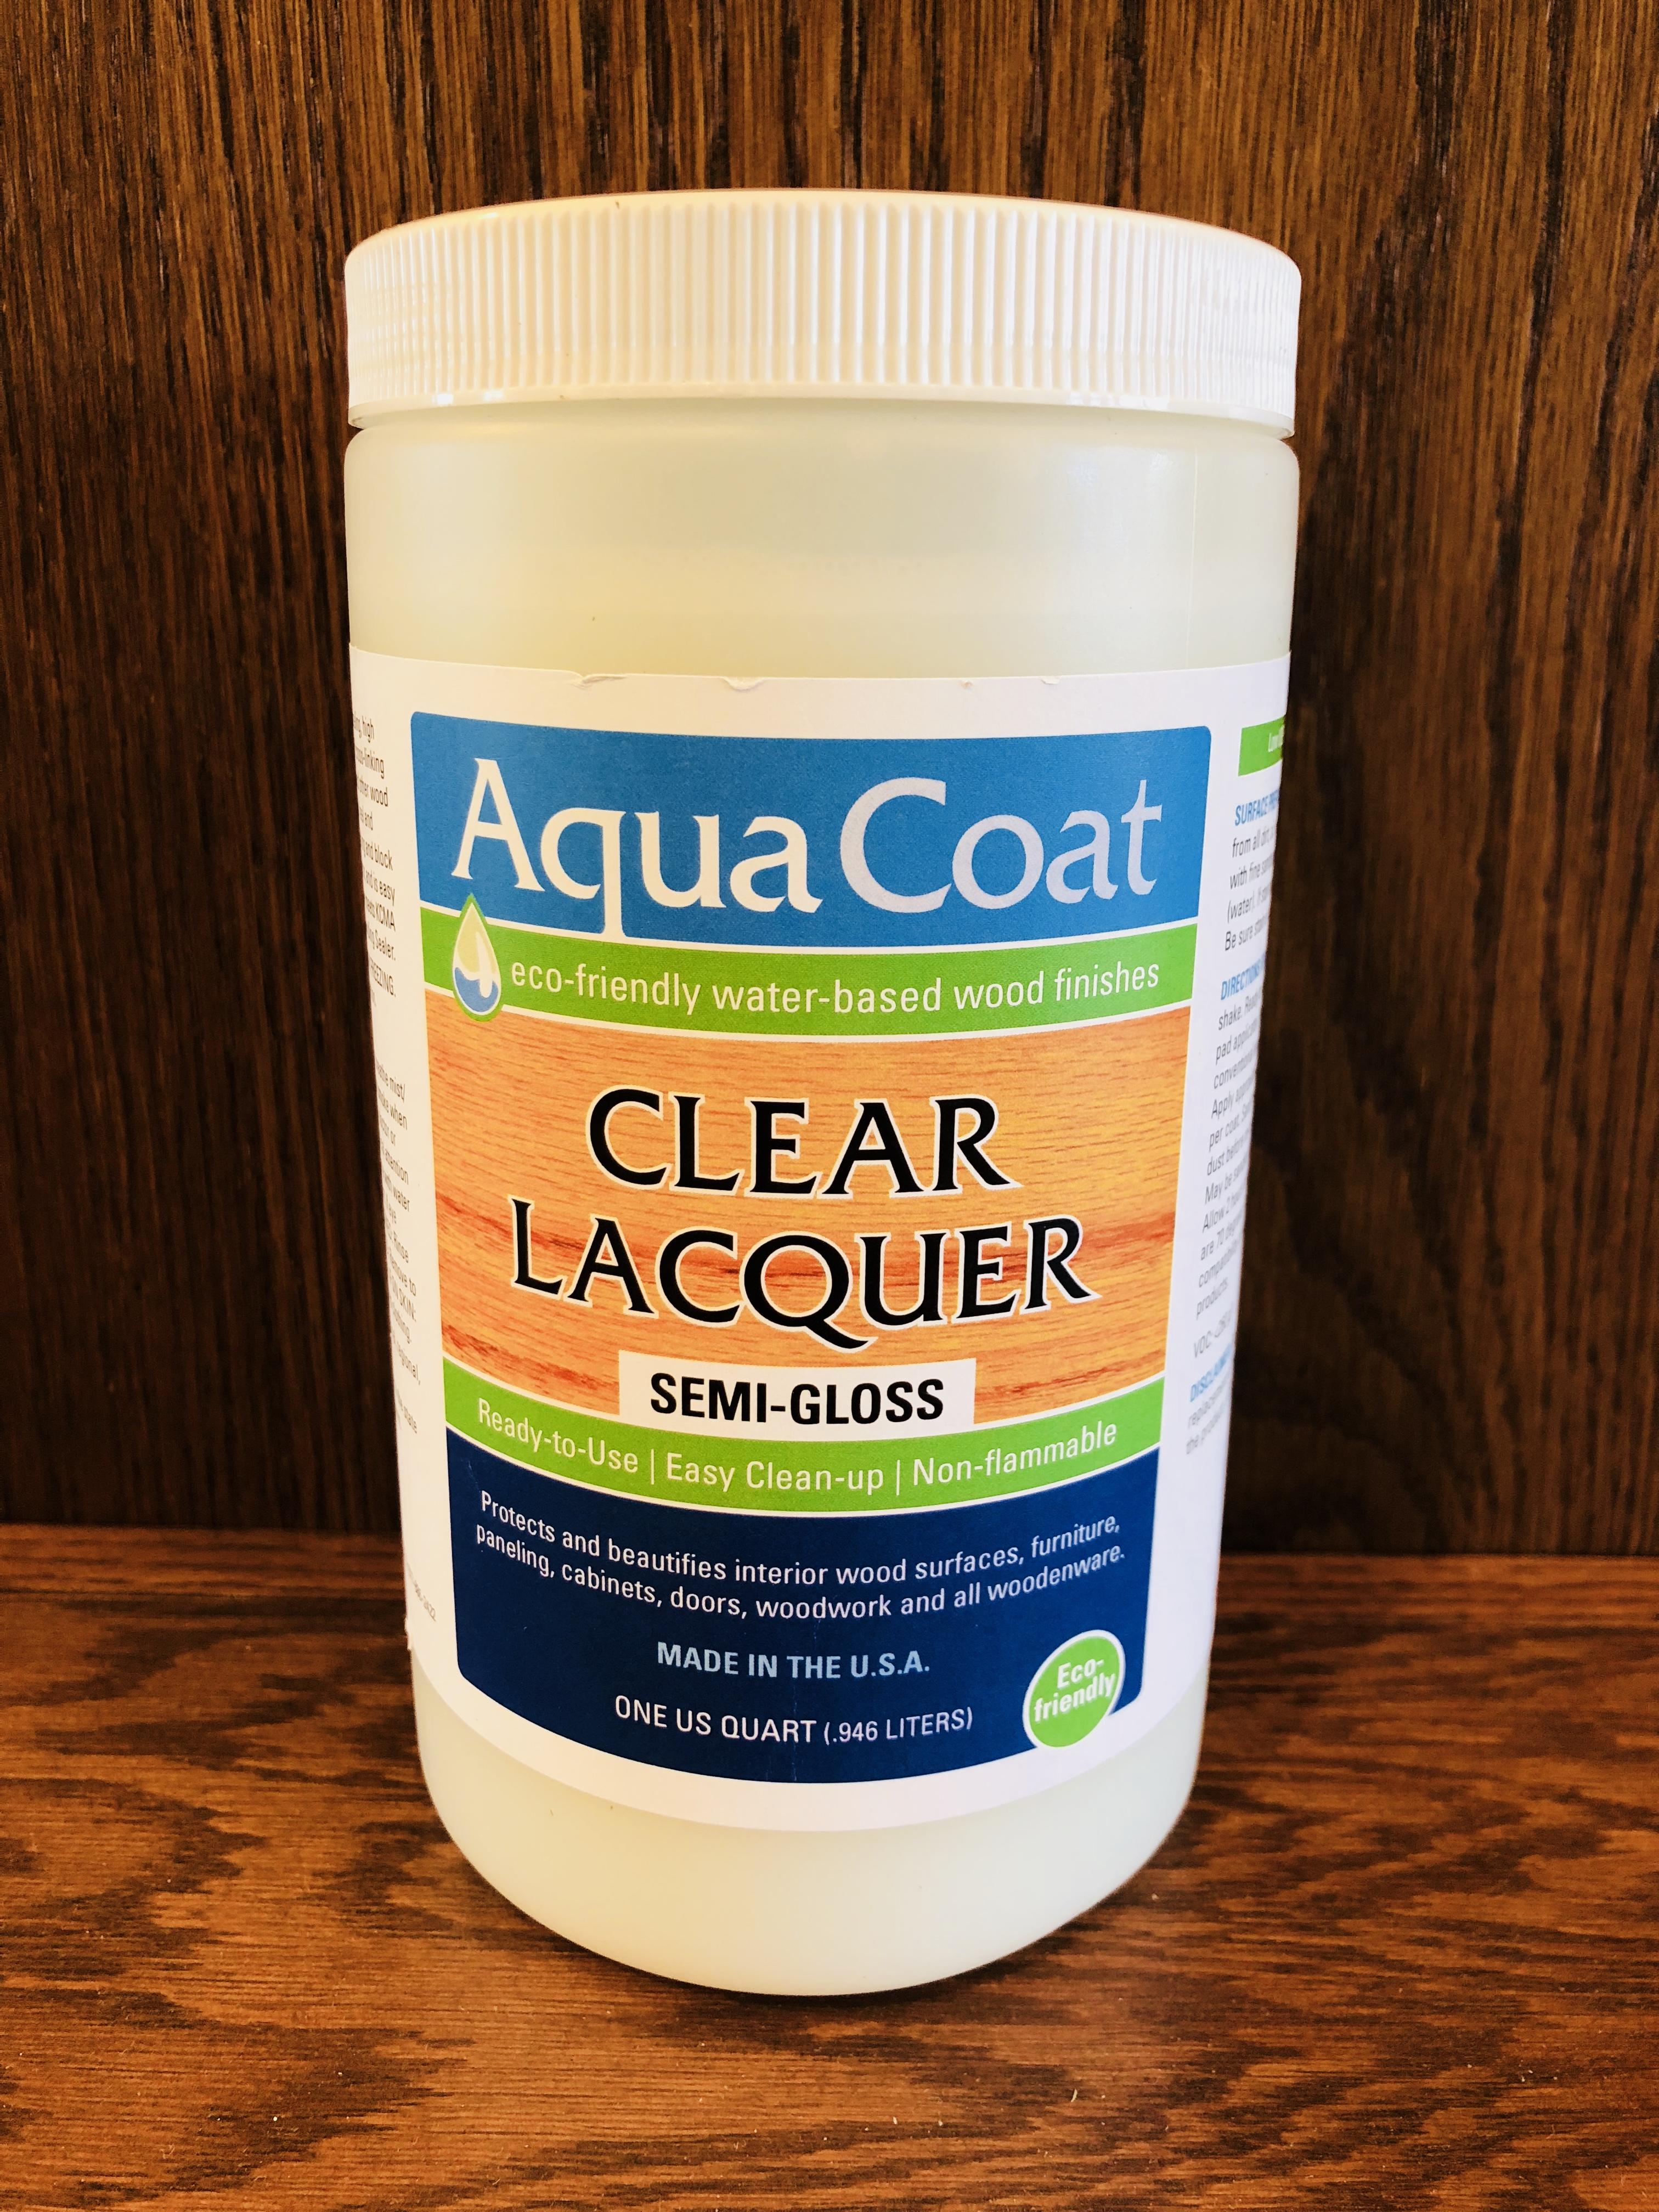 Clear water-based lacquer